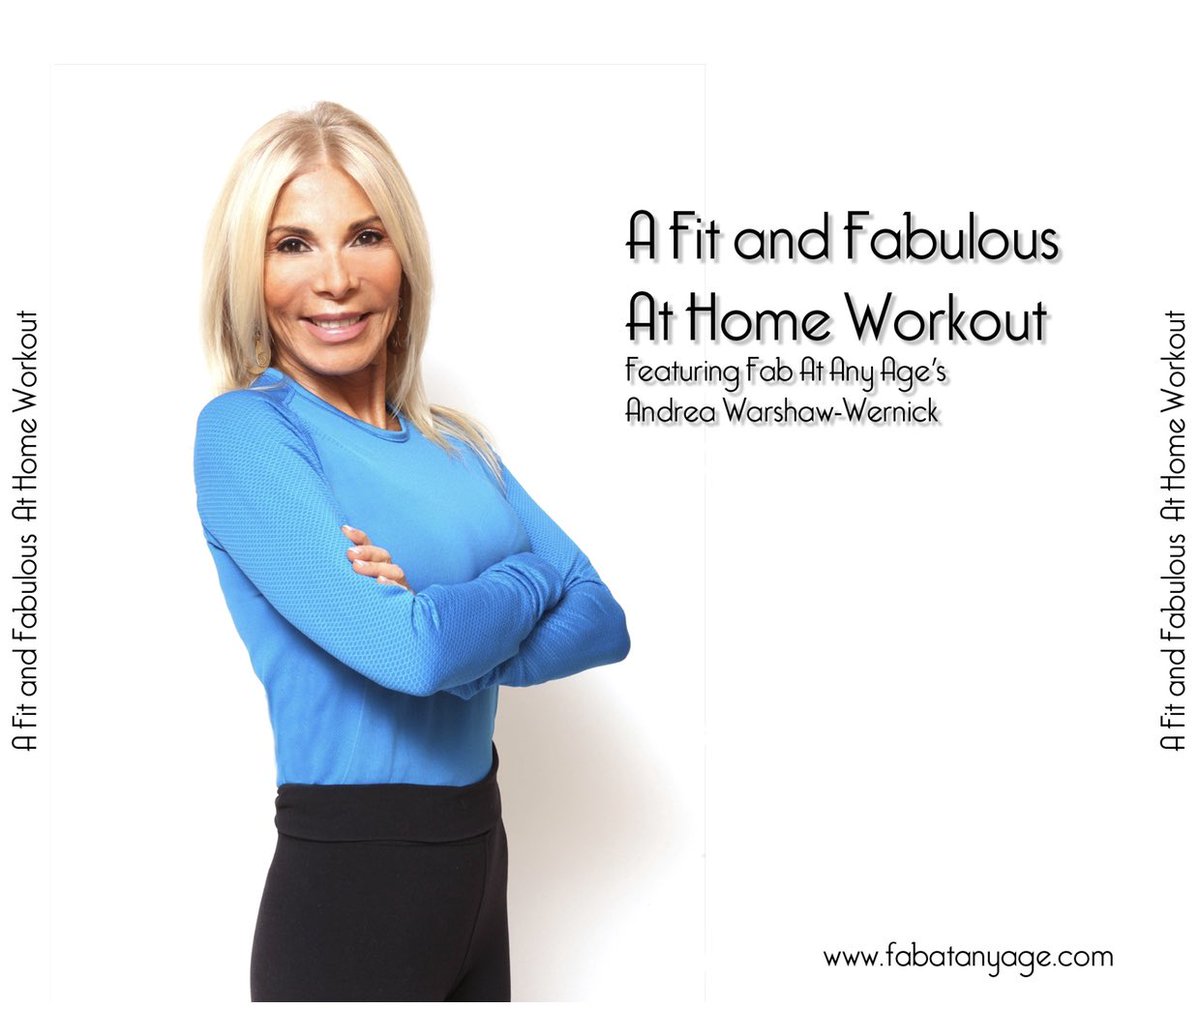 #TBT #2012  The#cover for my #fabatanyage #fitandfabulous #homeworkout #video CD. 😉
So apropos for today’s #newnormal of #workingoutathome. 💪🏻#lifeandstylecoach #fitness #motivation#fitover50#fitover60#fitover70 #keeponmoving #forever 🙌🏻